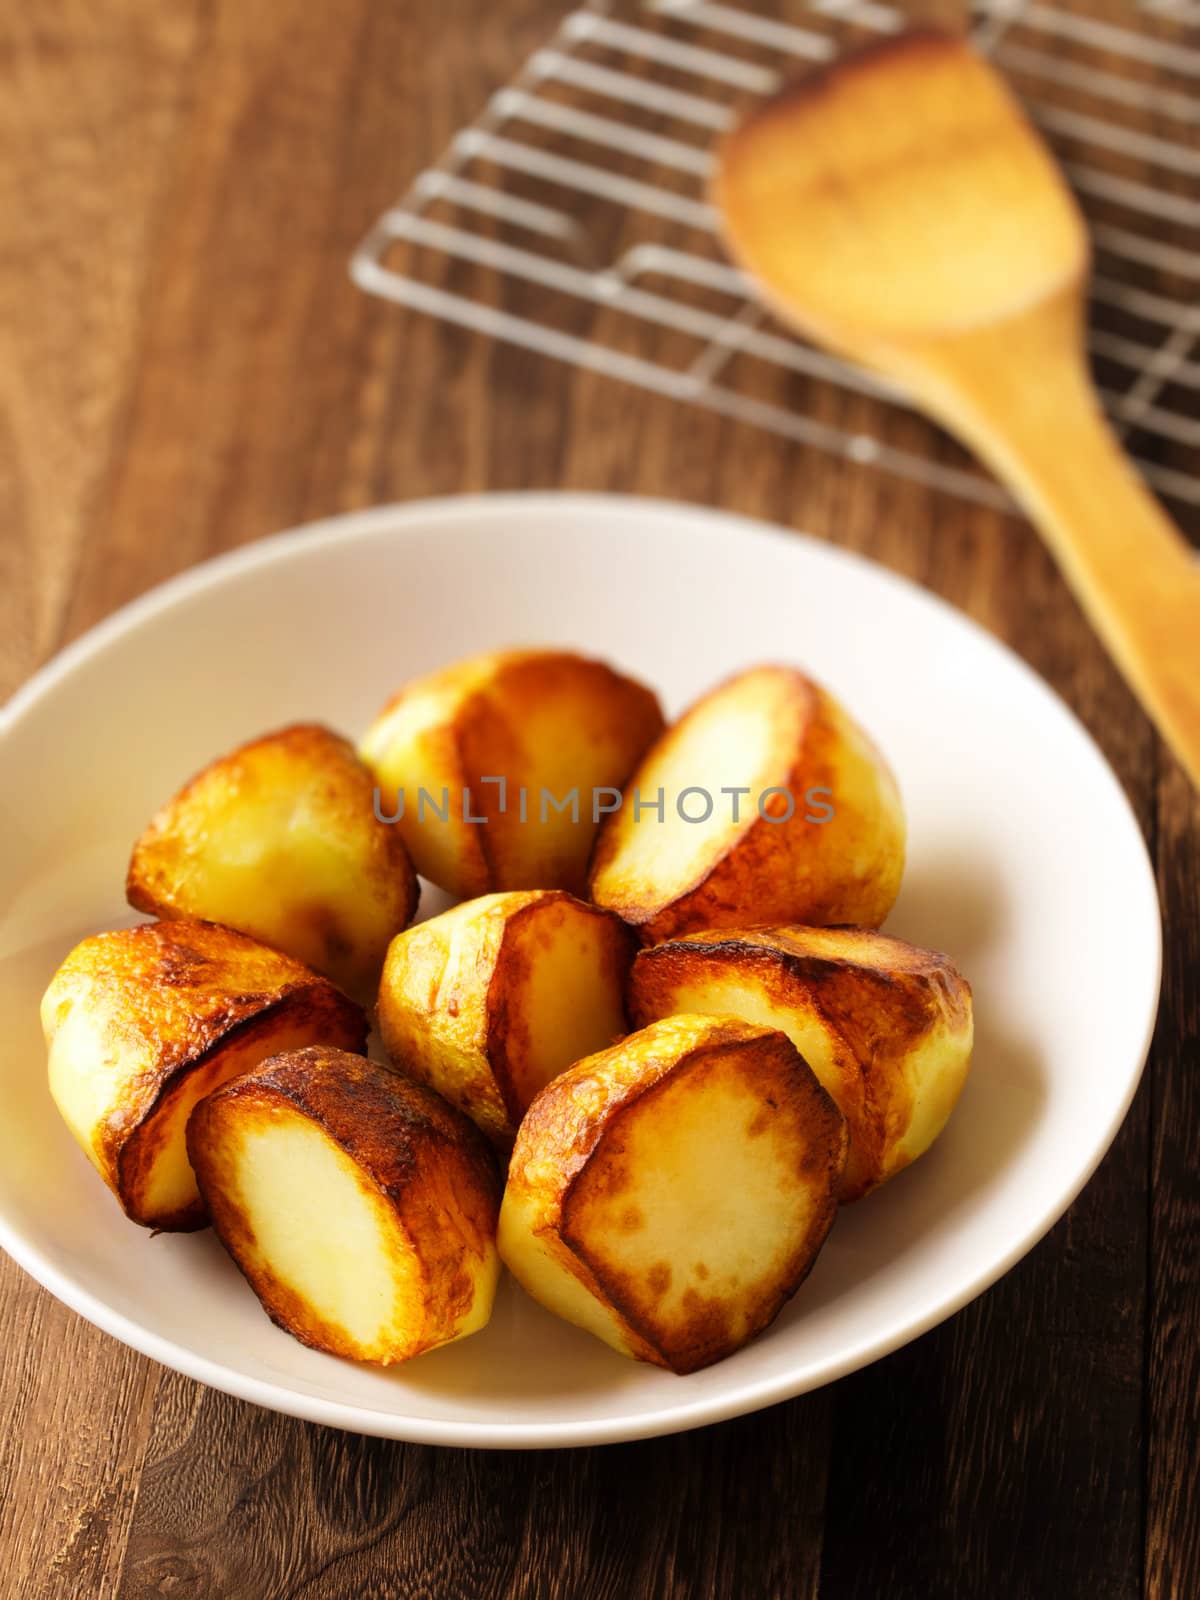 close up of a bowl of roasted potatoes